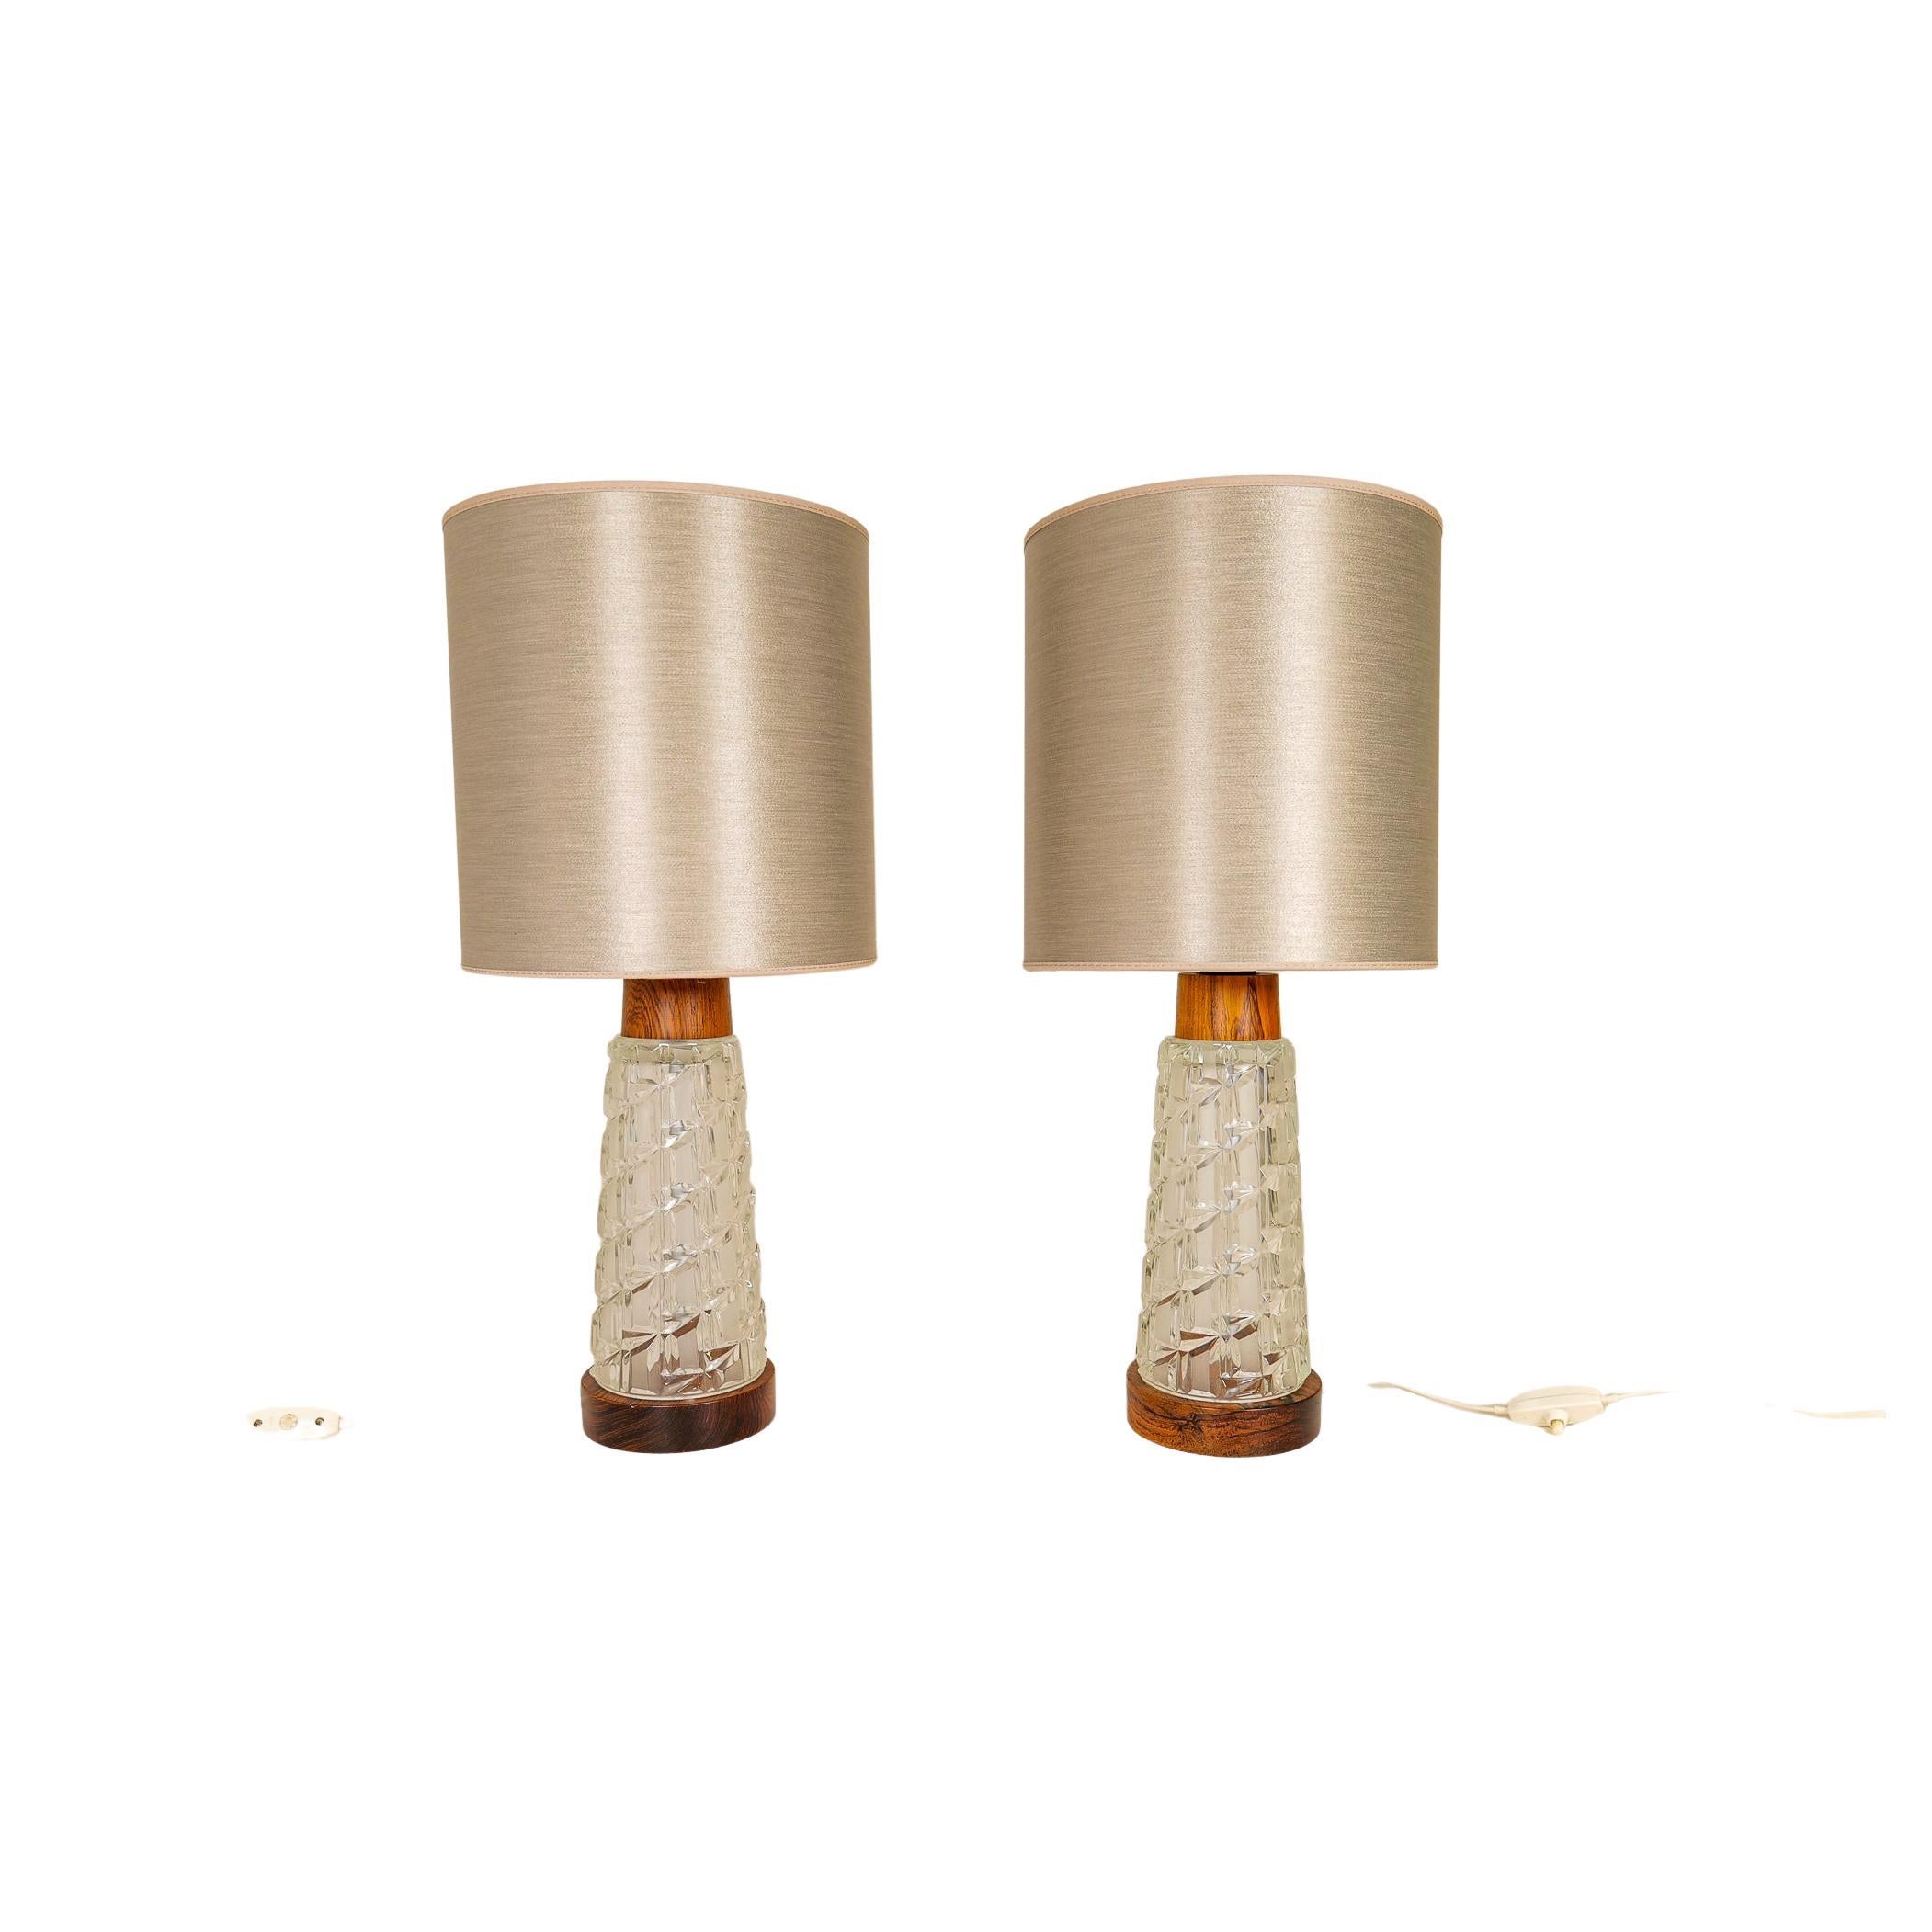 Midcentury Table Lamps Orrefors Teak and Glass Sweden